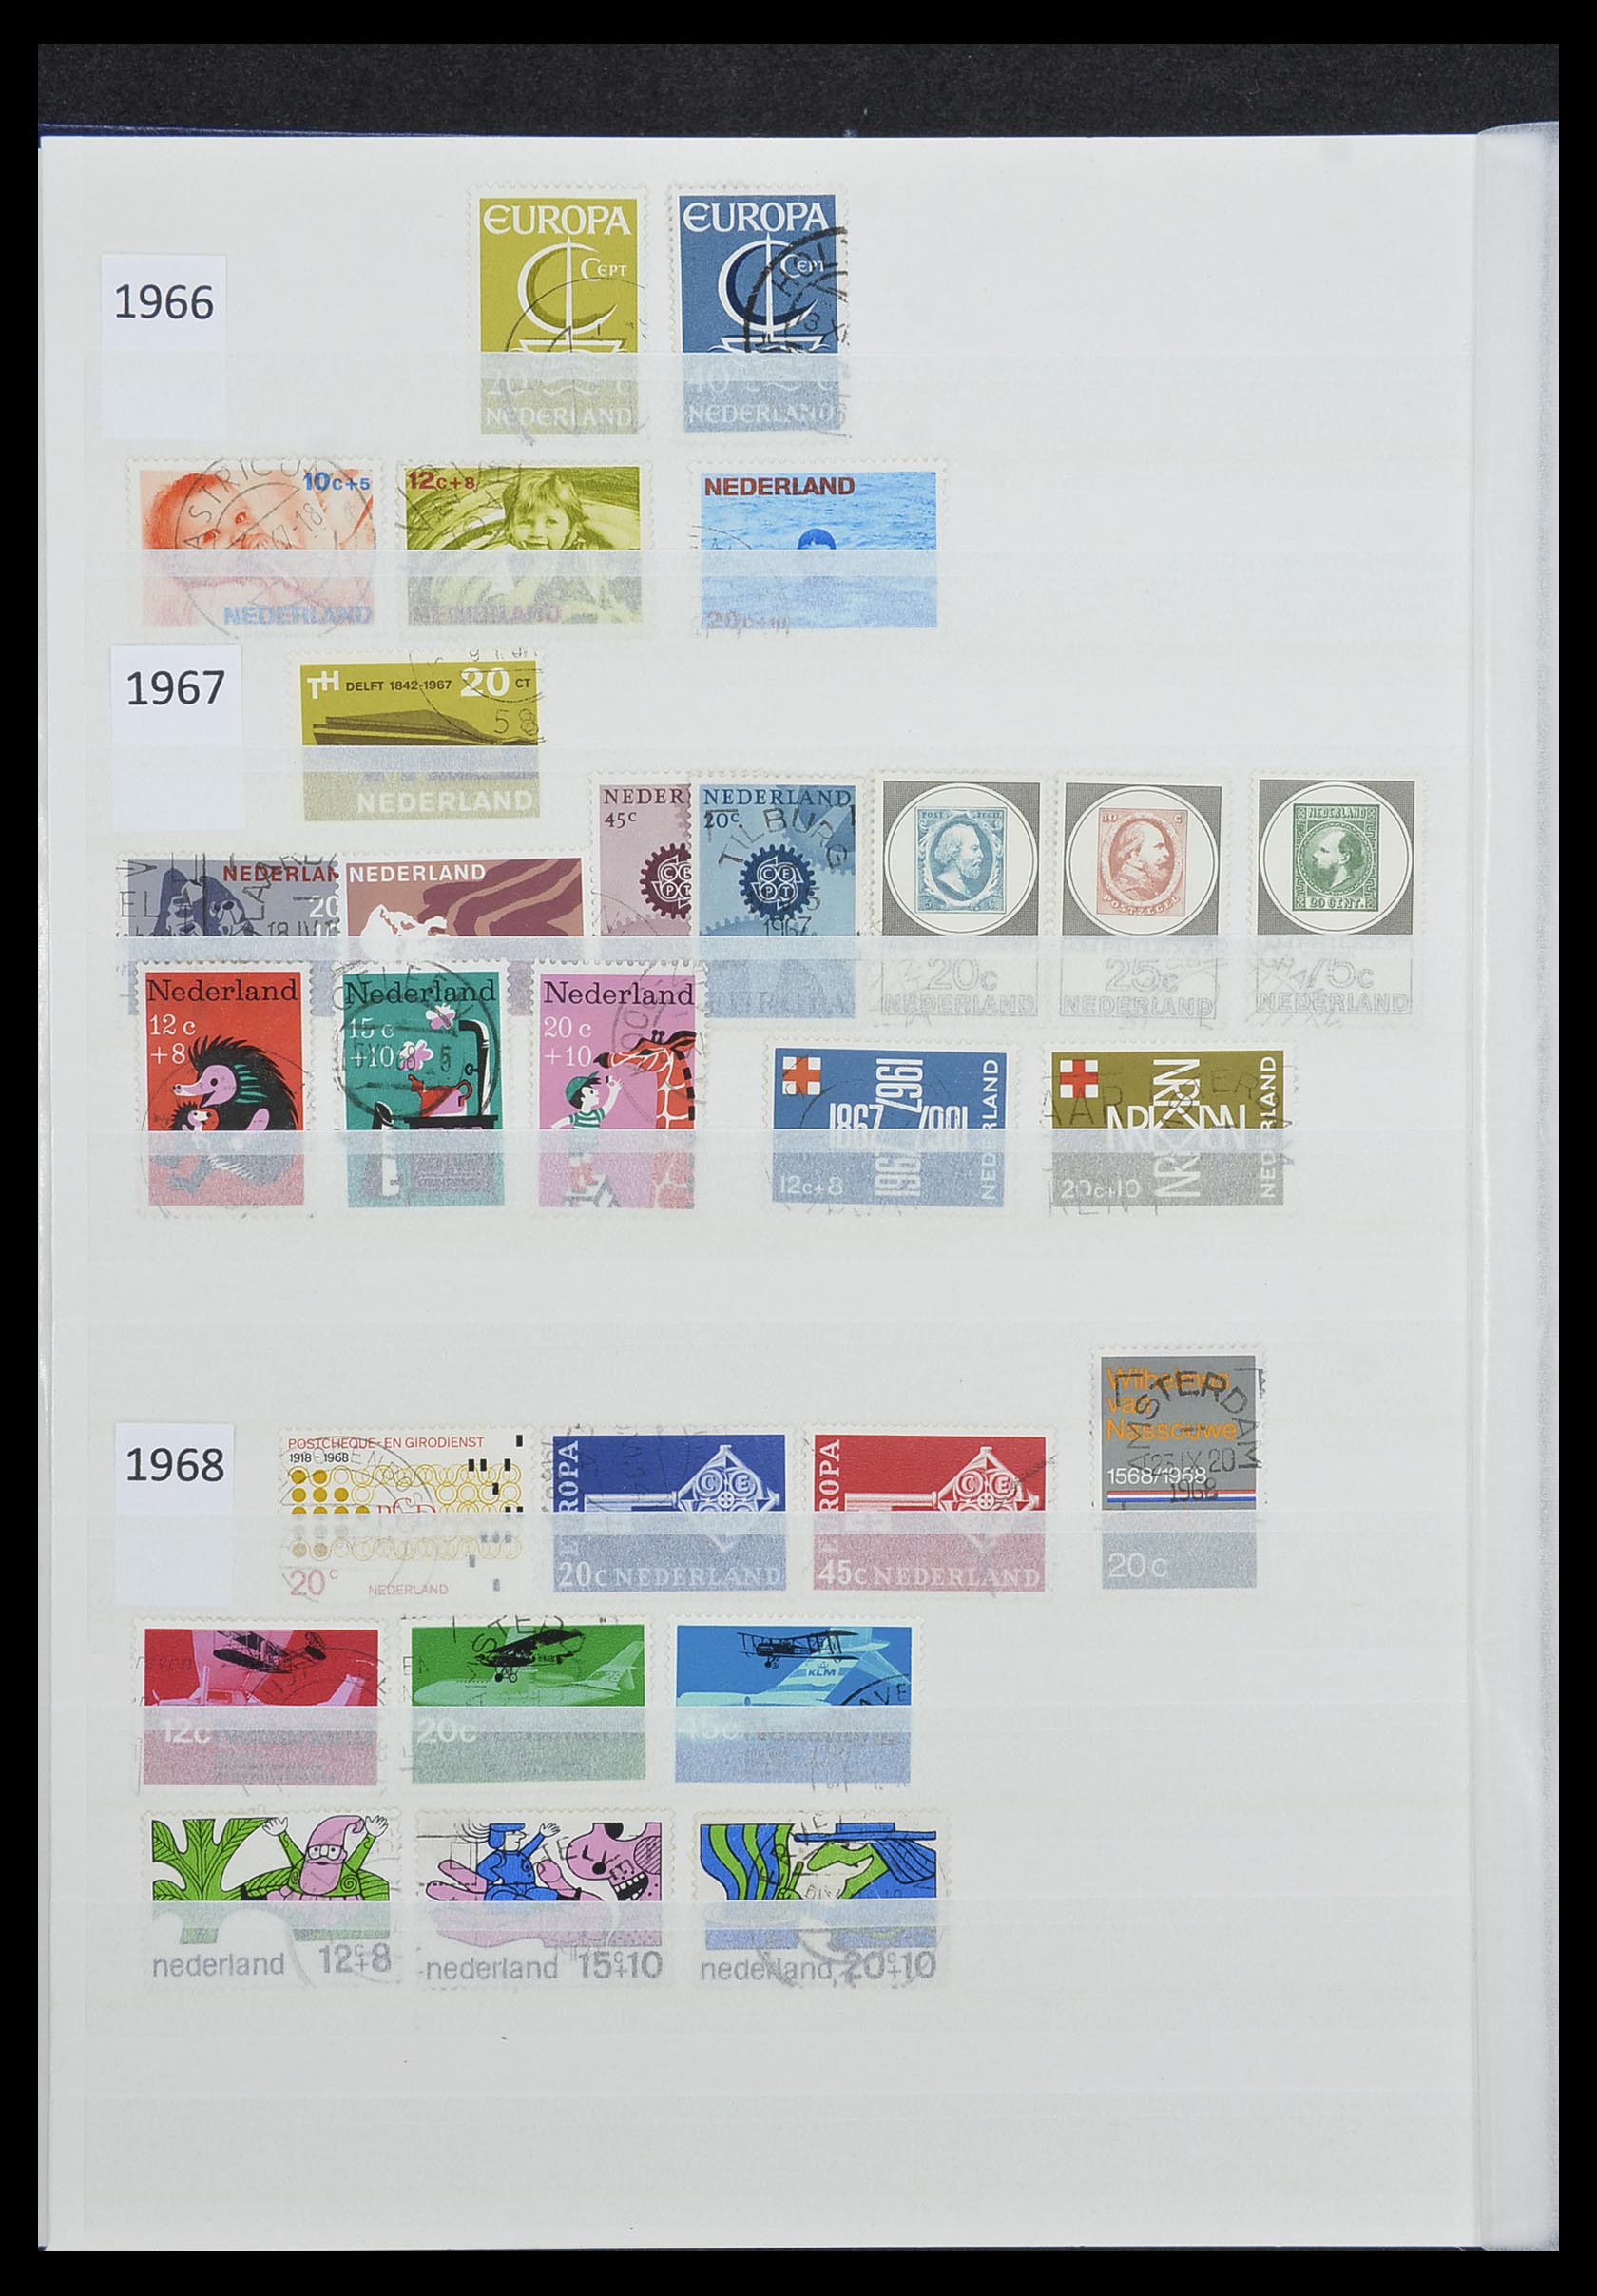 33875 048 - Stamp collection 33875 Europa.